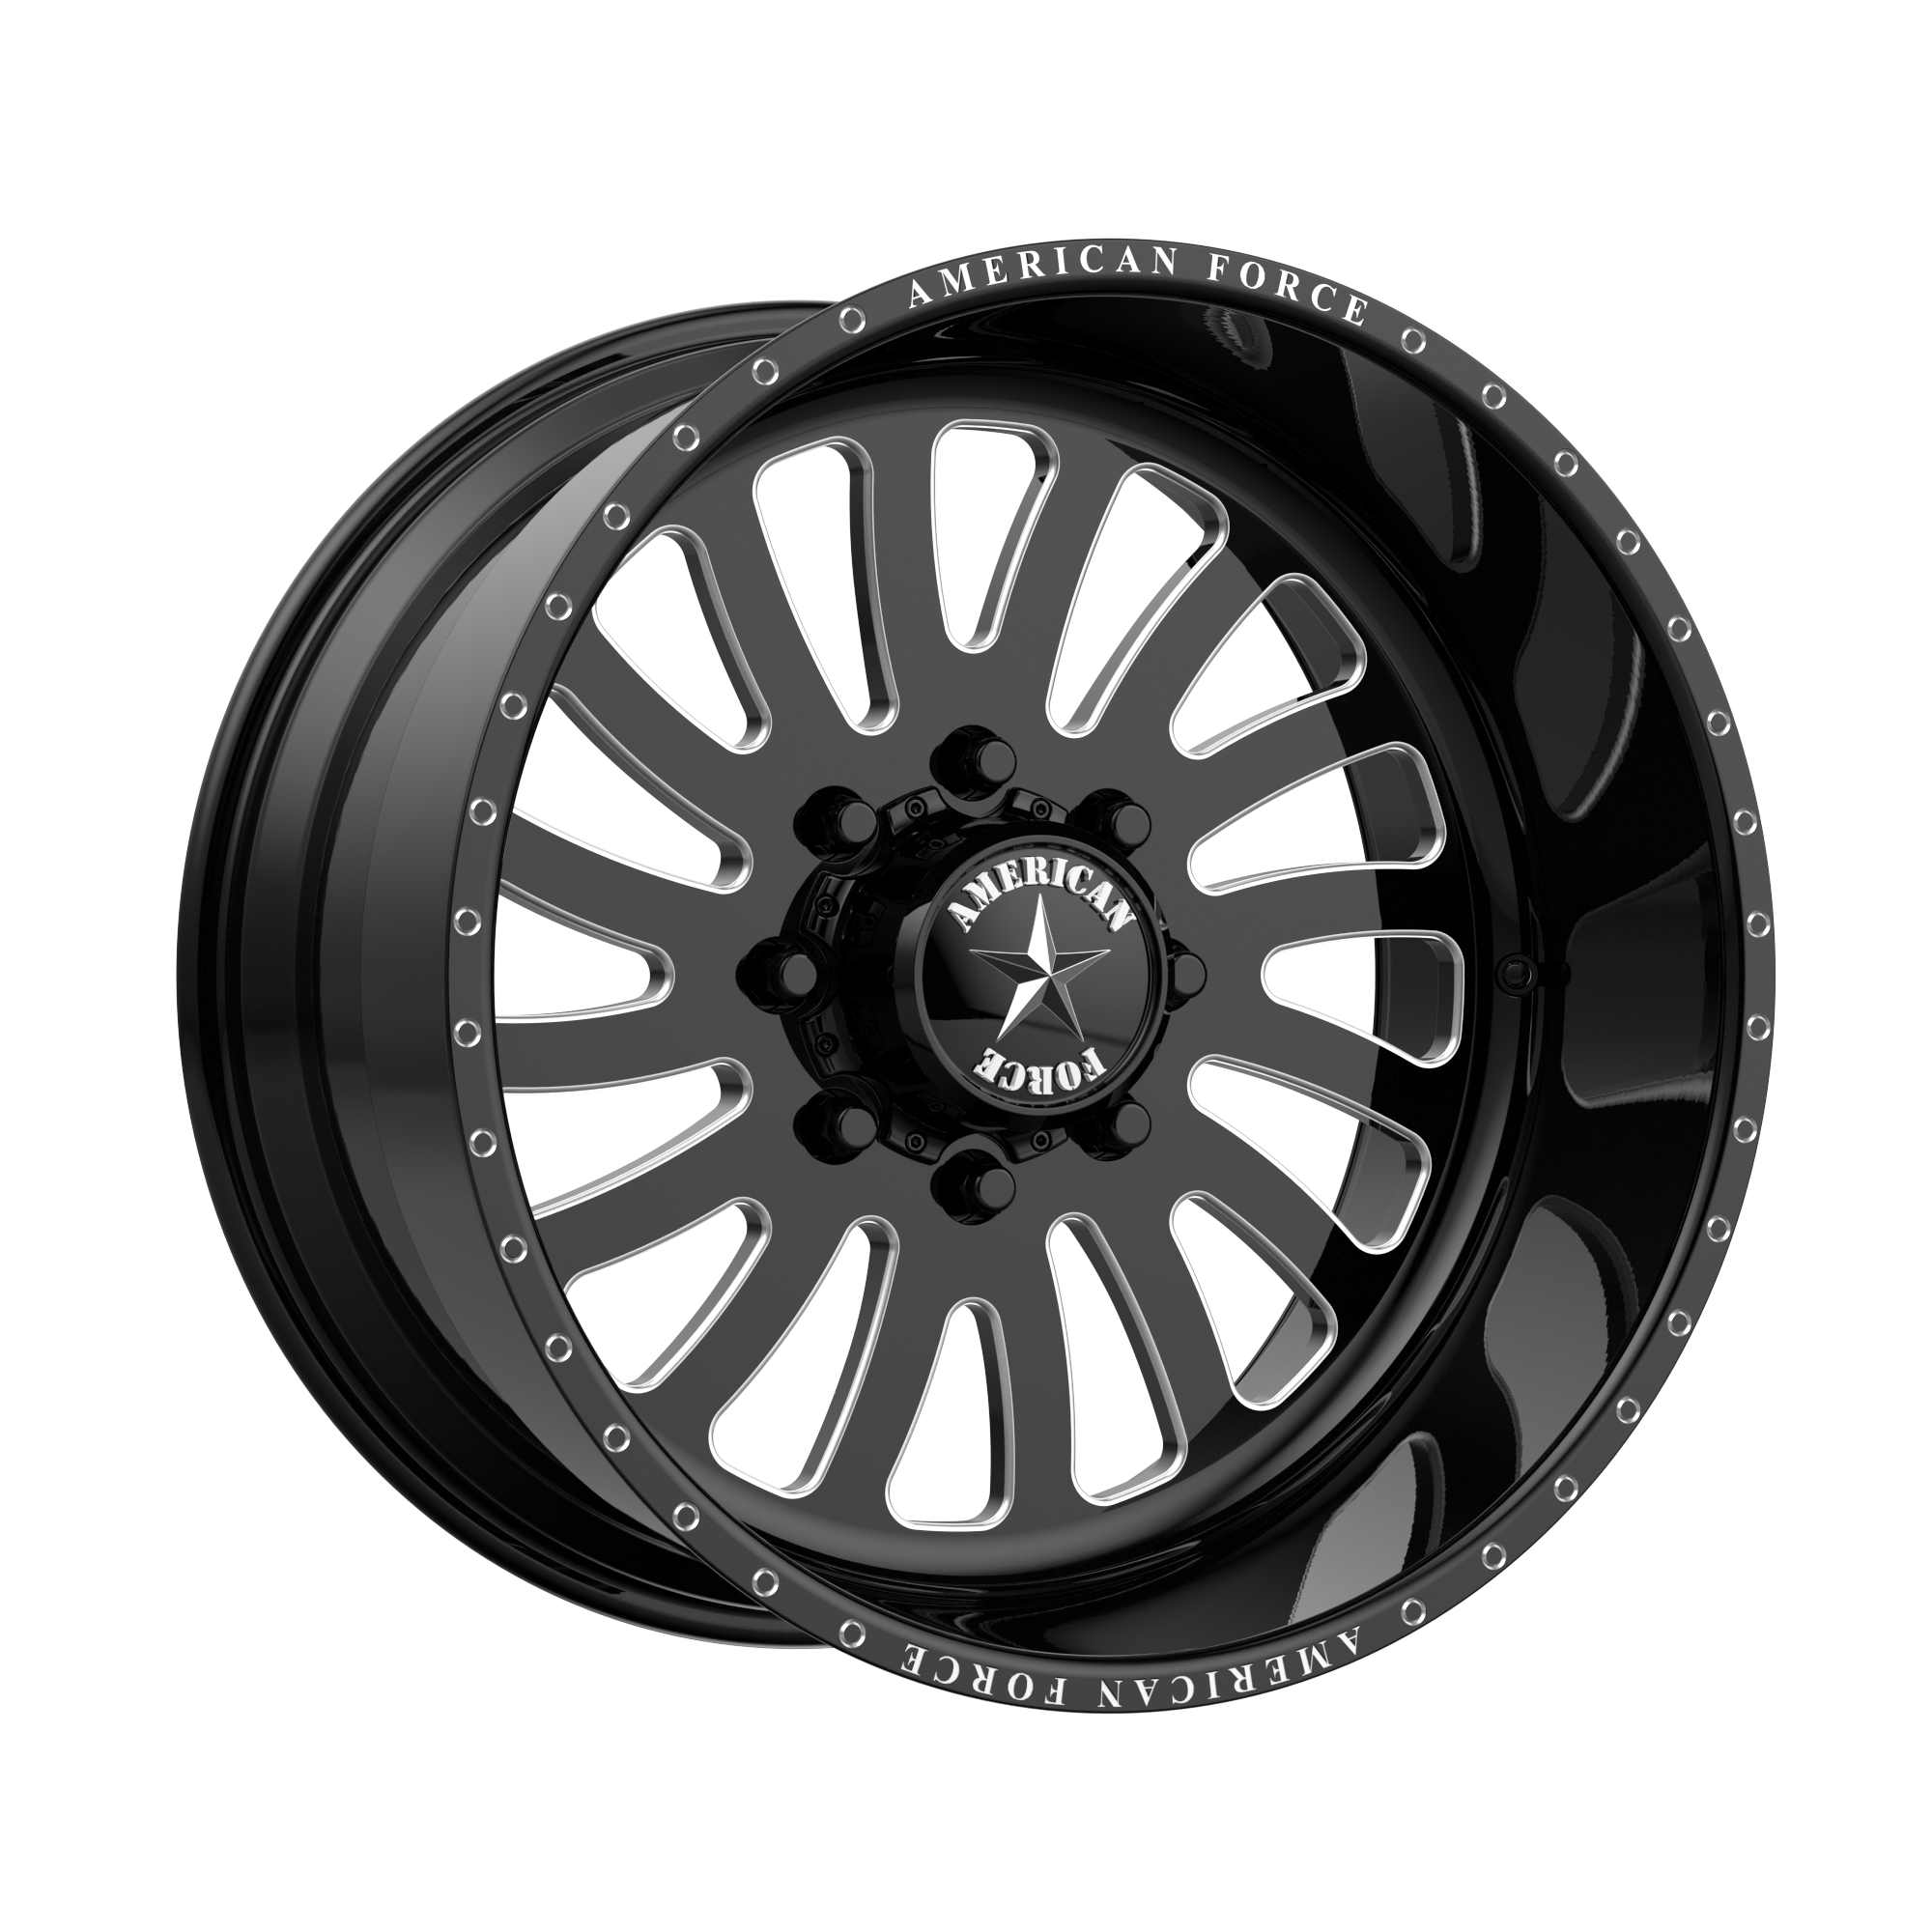 OCTANE SS 22x16 8x165.10 GLOSS BLACK MACHINED (-101 mm) - Tires and Engine Performance